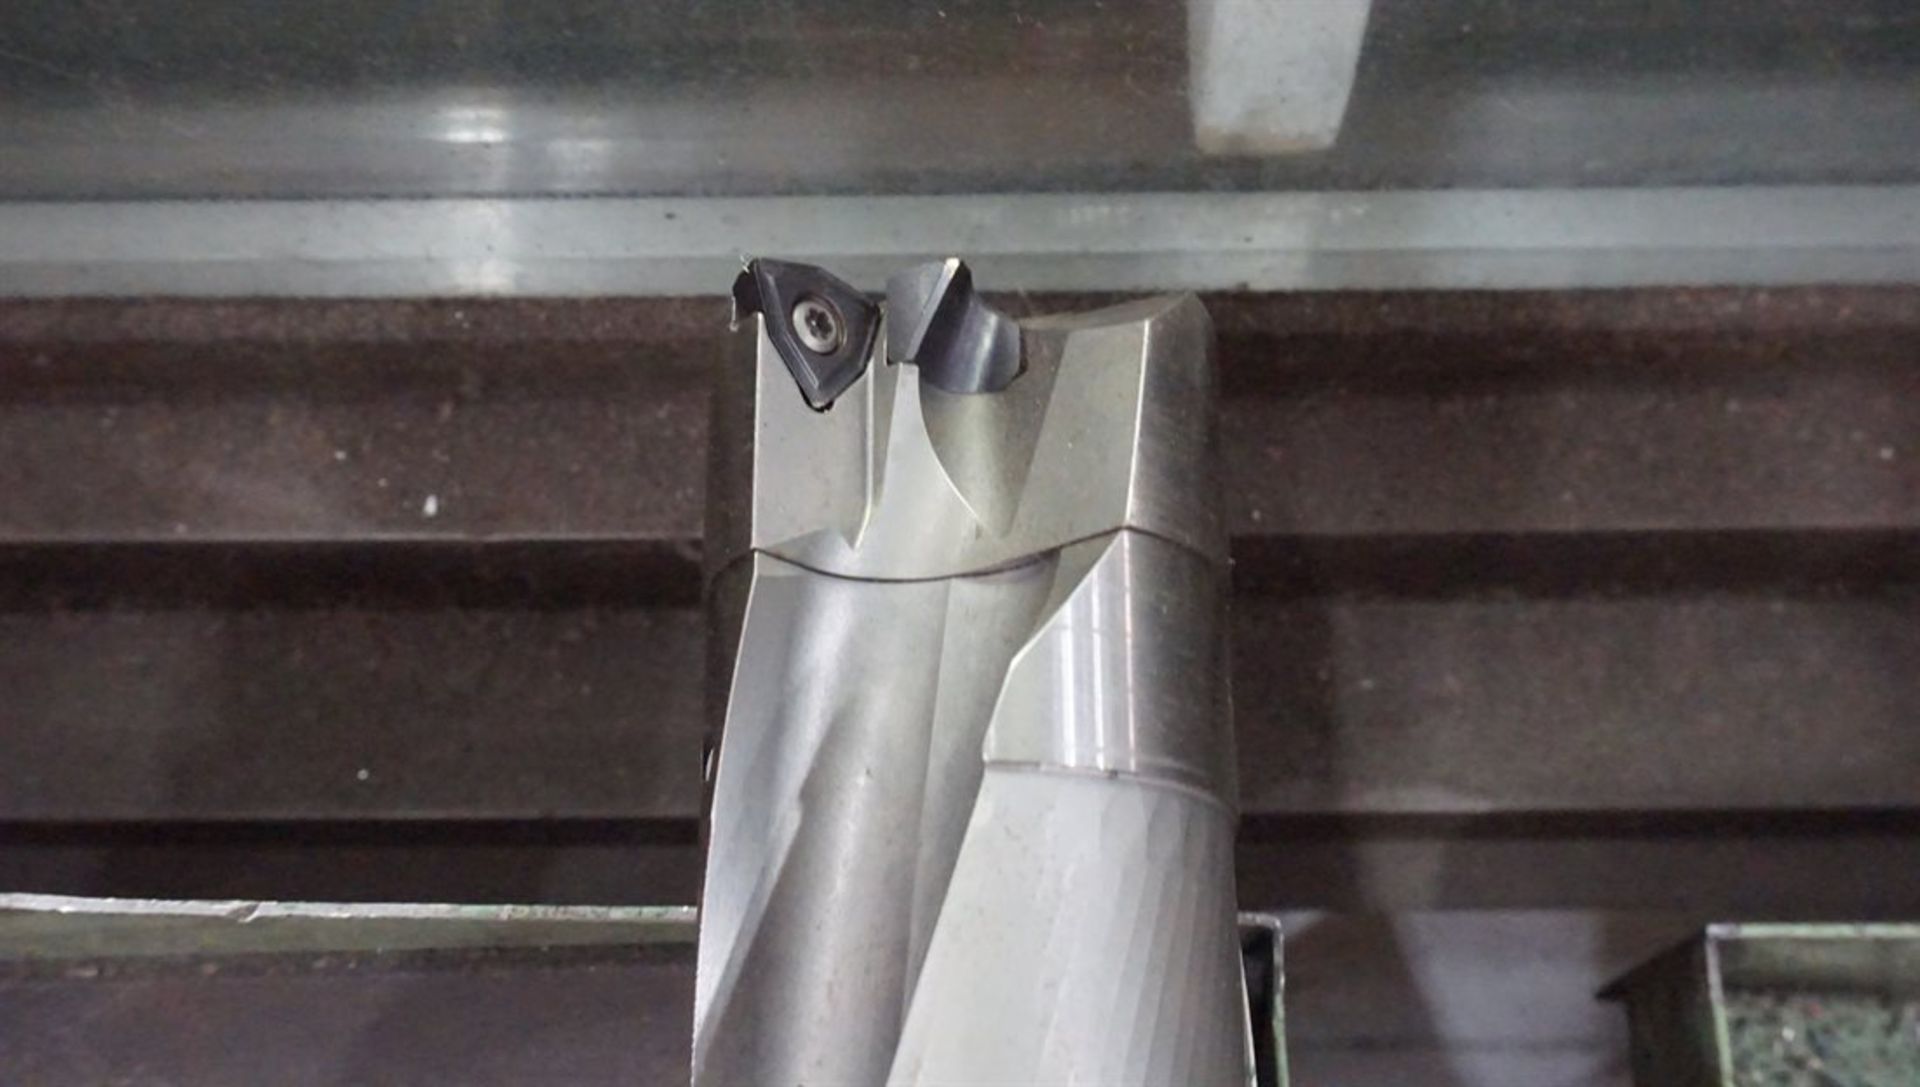 Asst. 50 Taper Tool Holder c/w Indexable Tool - Image 4 of 4